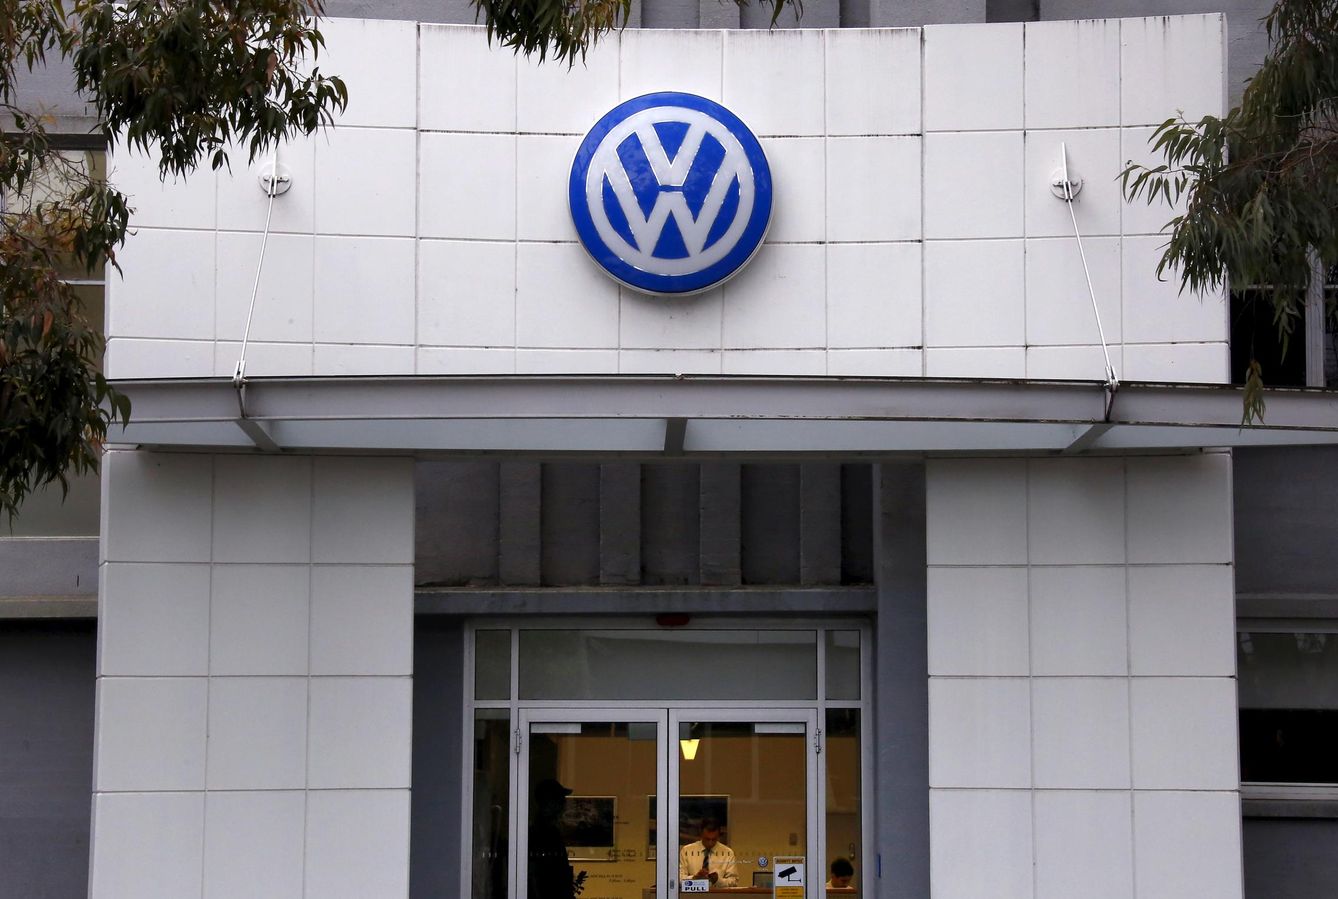 An employee stands behind the counter at a volkswagen service center for the german automaker located in sydney